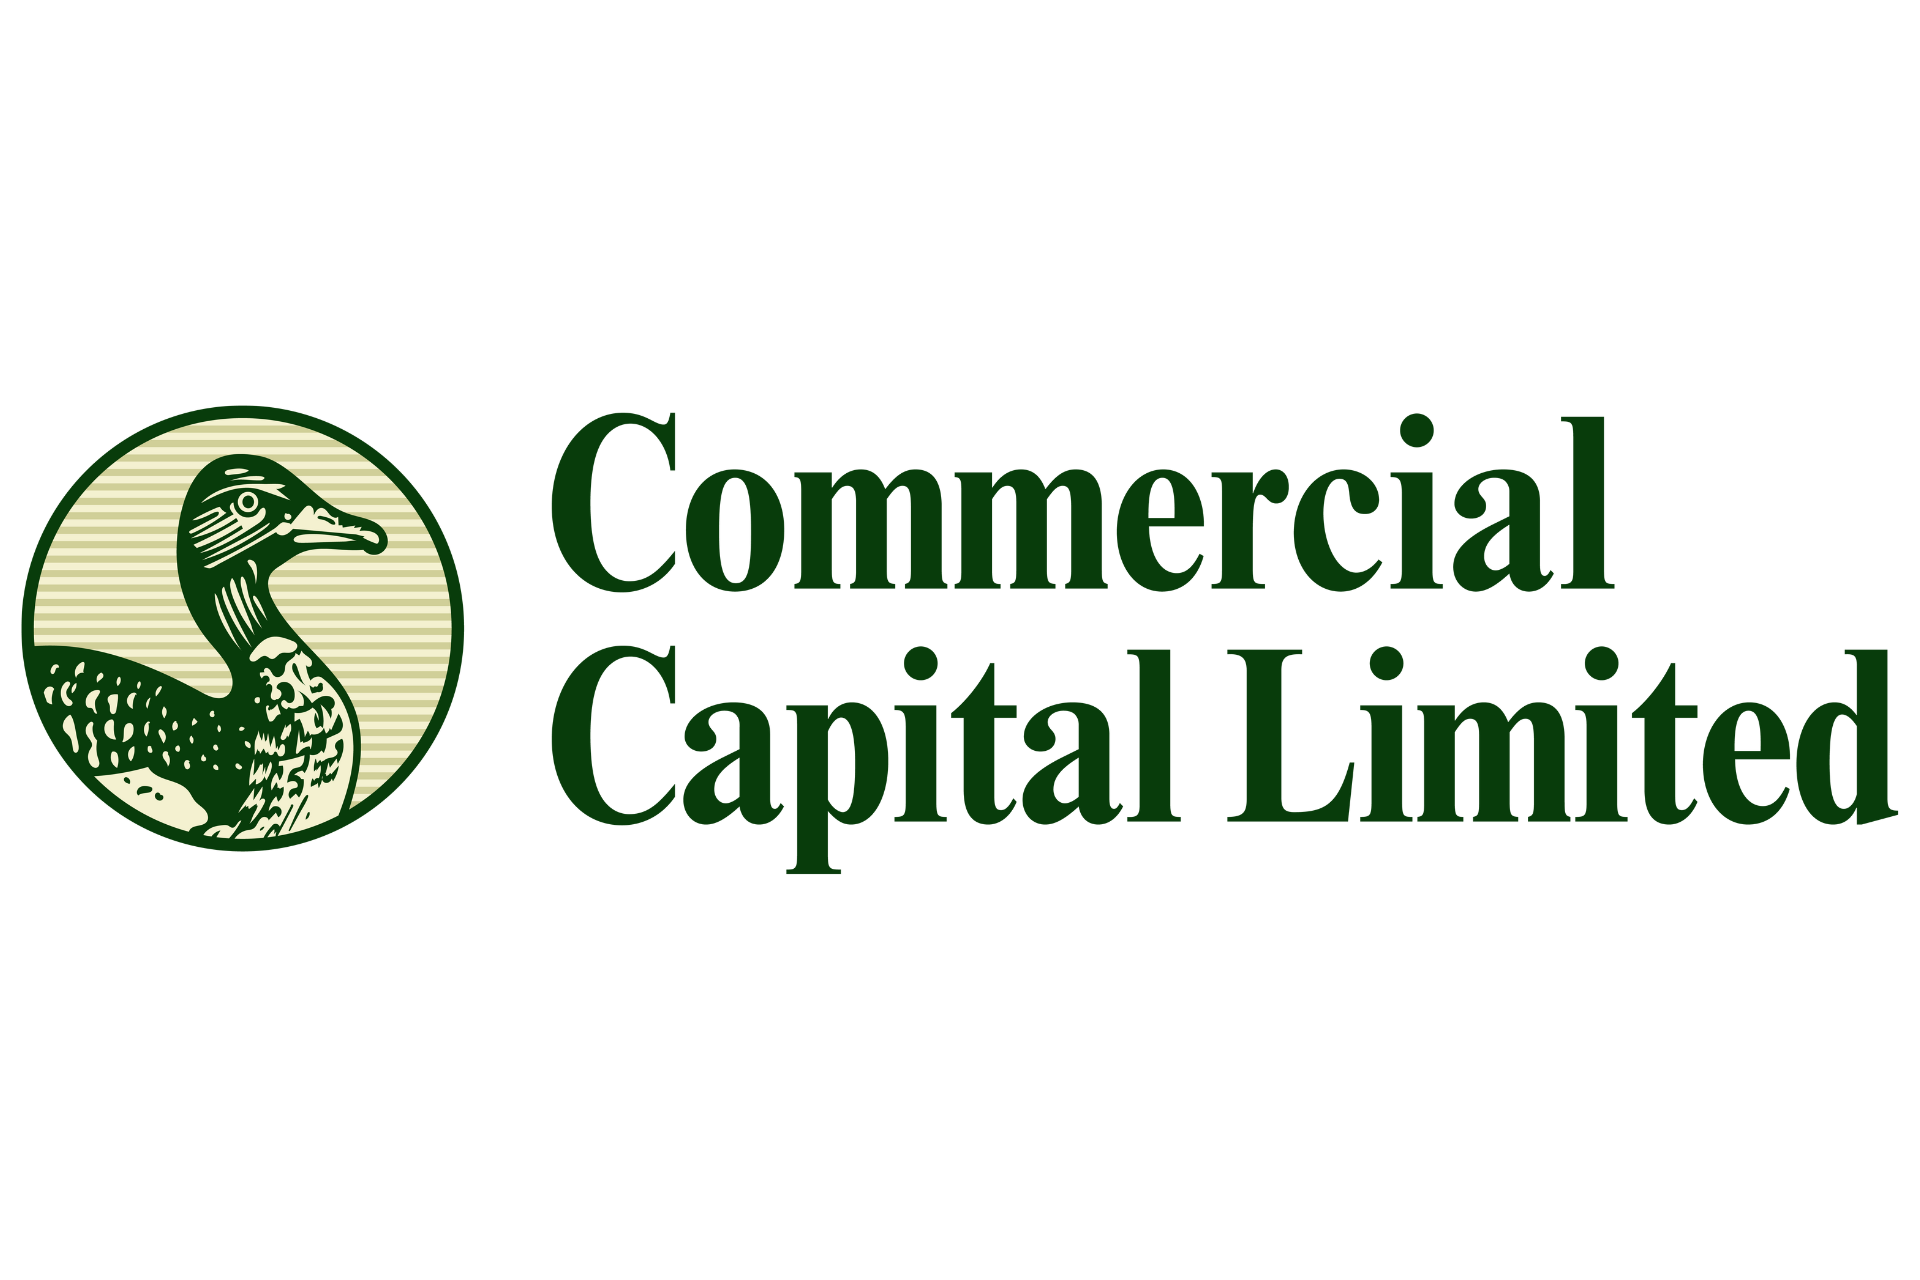 The logo for commercial capital limited shows a duck in a circle.